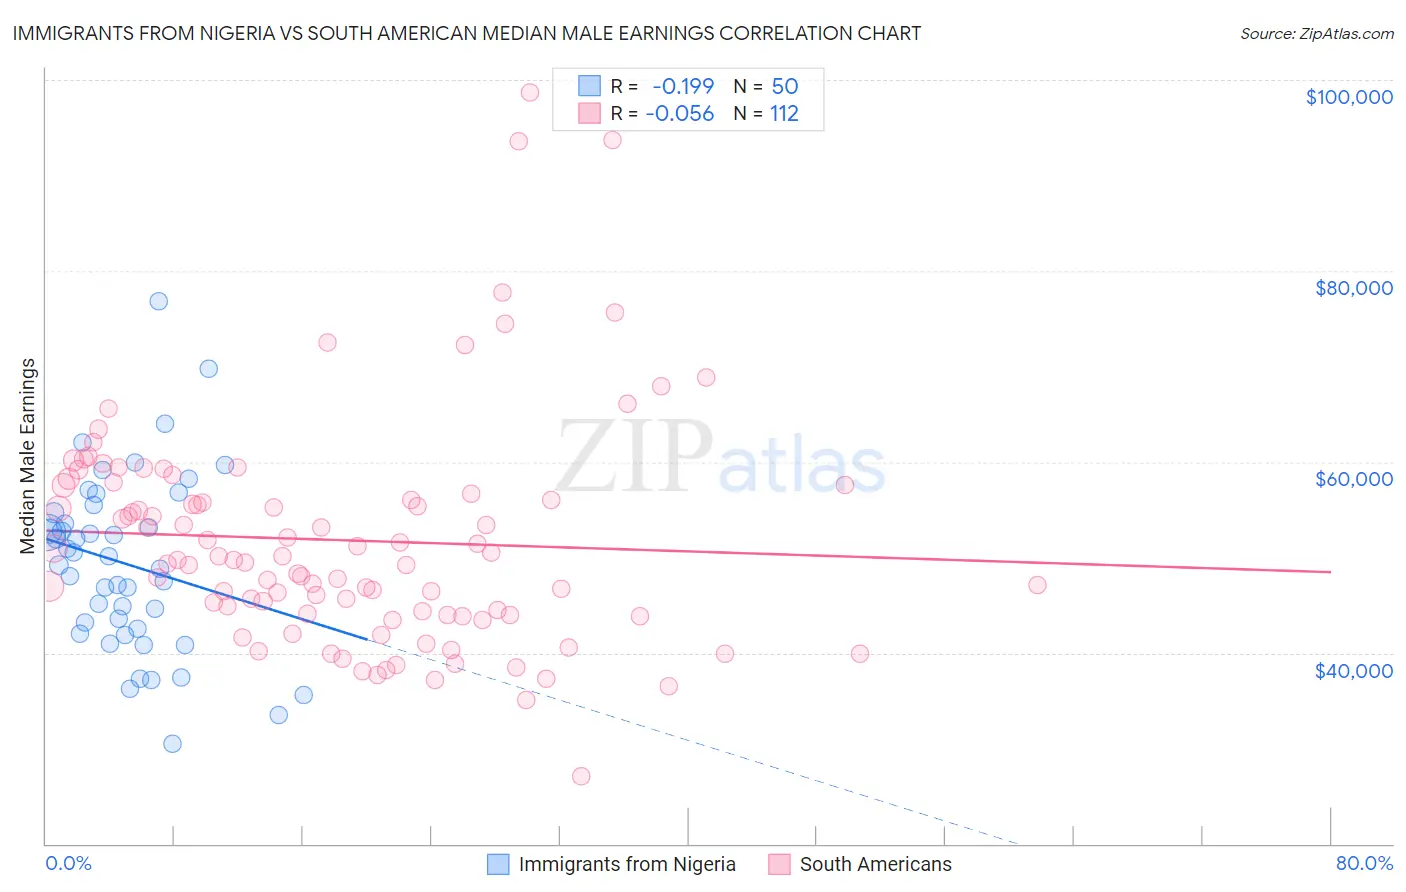 Immigrants from Nigeria vs South American Median Male Earnings